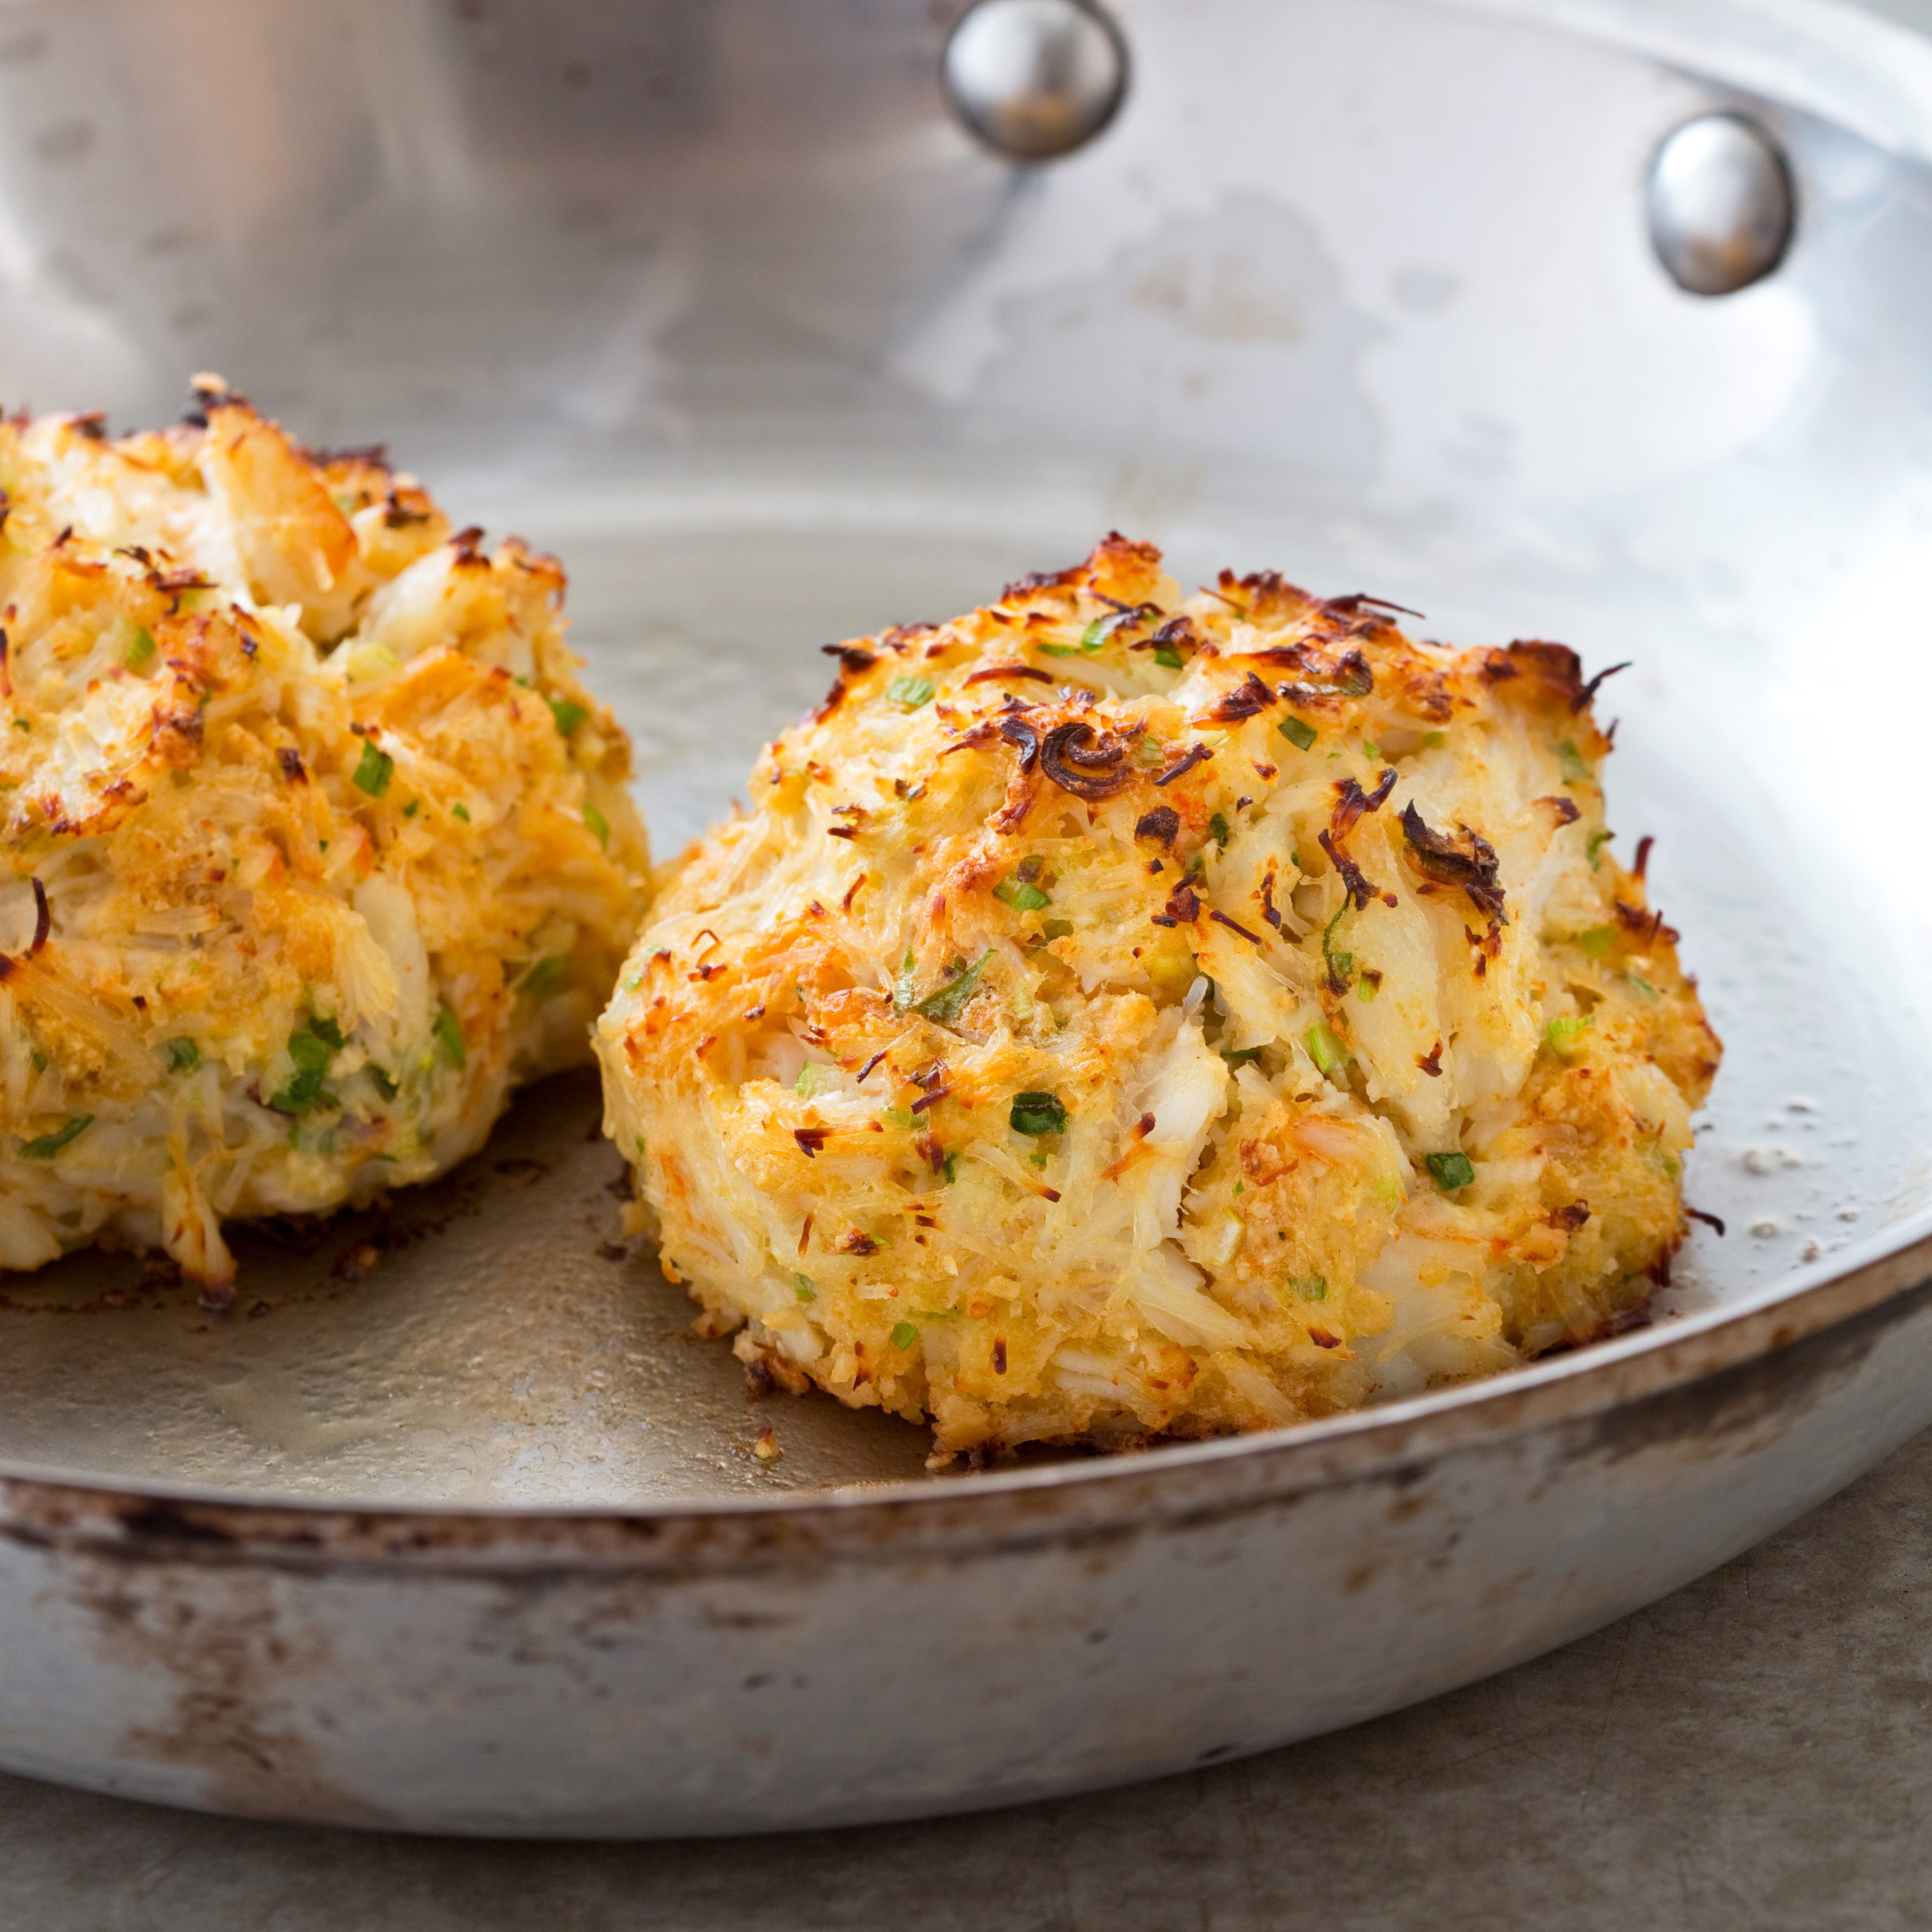 Maryland Crab Cakes
 Maryland Crab Cakes—Pan Fried Crab Cakes with Old Bay